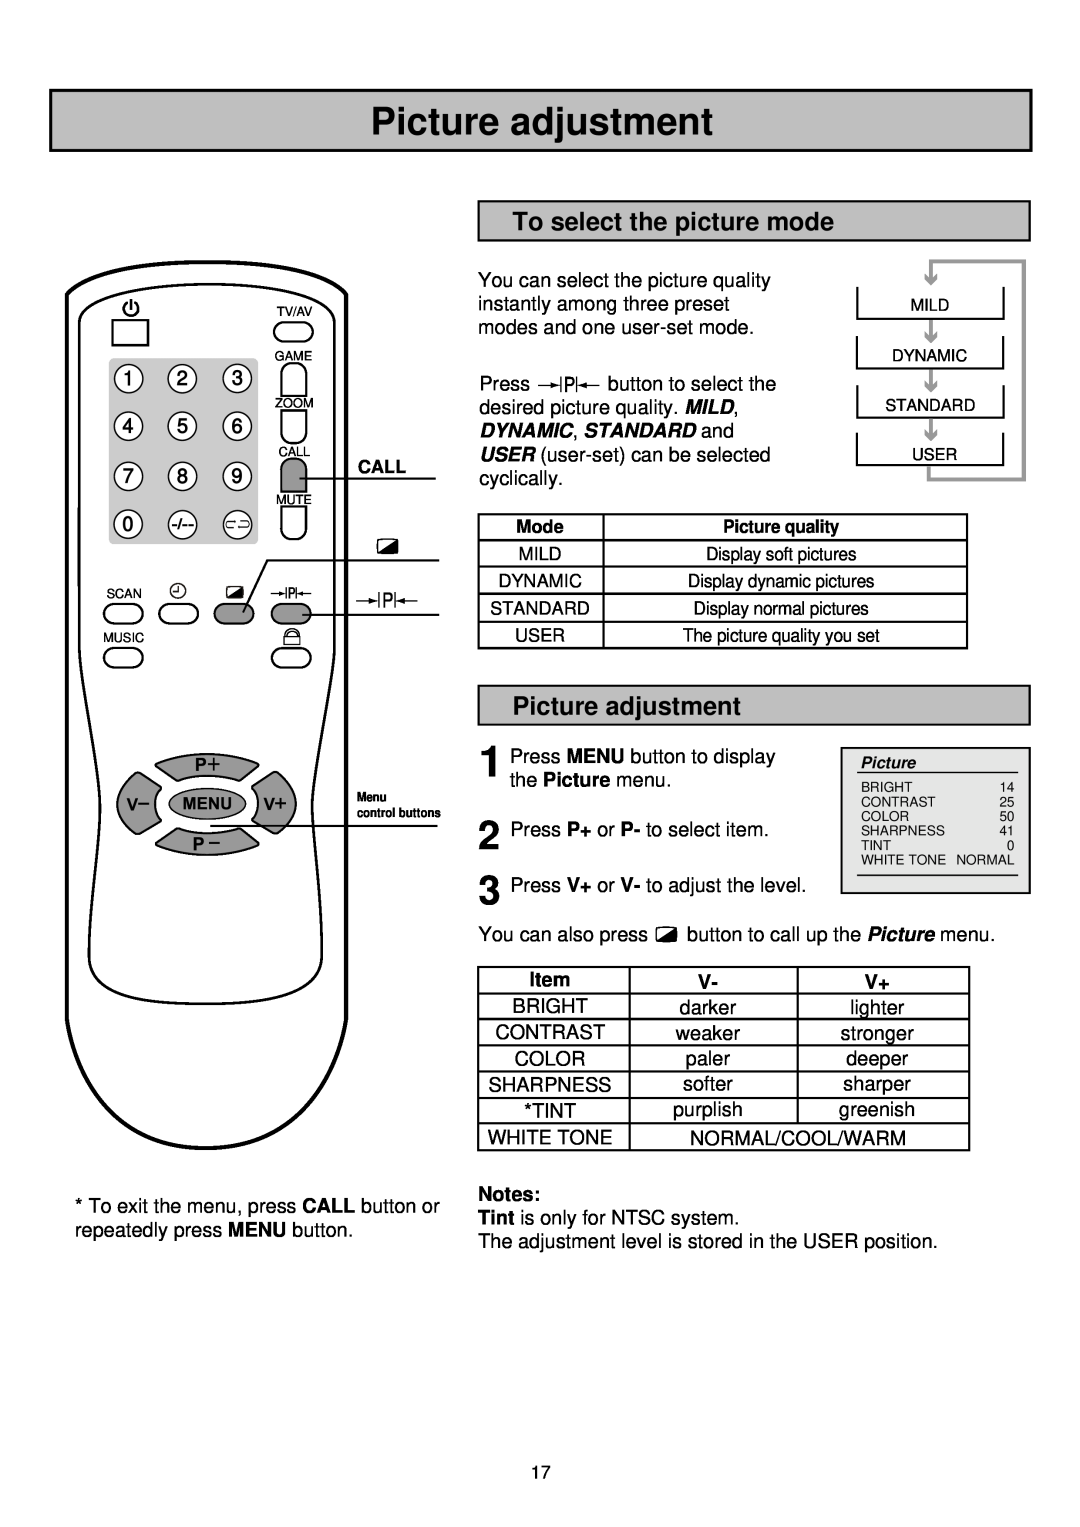 Palsonic 6835TK owner manual Picture adjustment, To select the picture mode, DYNAMIC, STANDARD and 